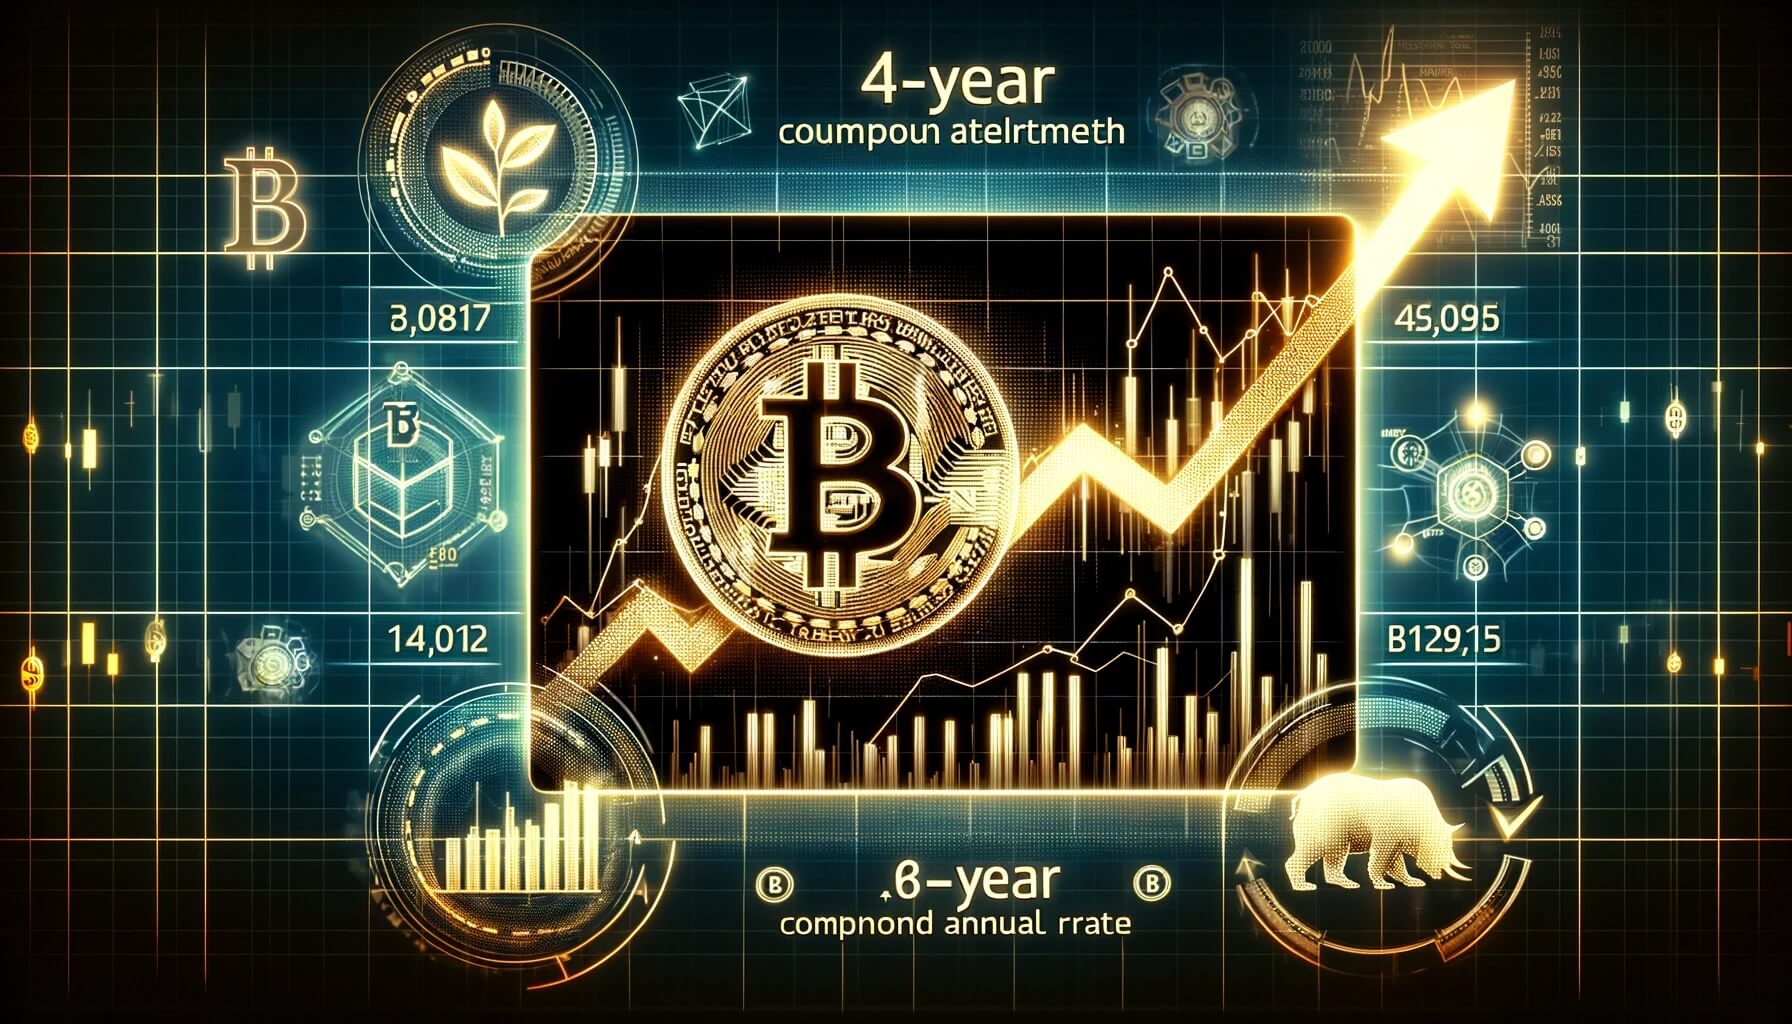  bitcoin growth 4-year compound performance considering asset 